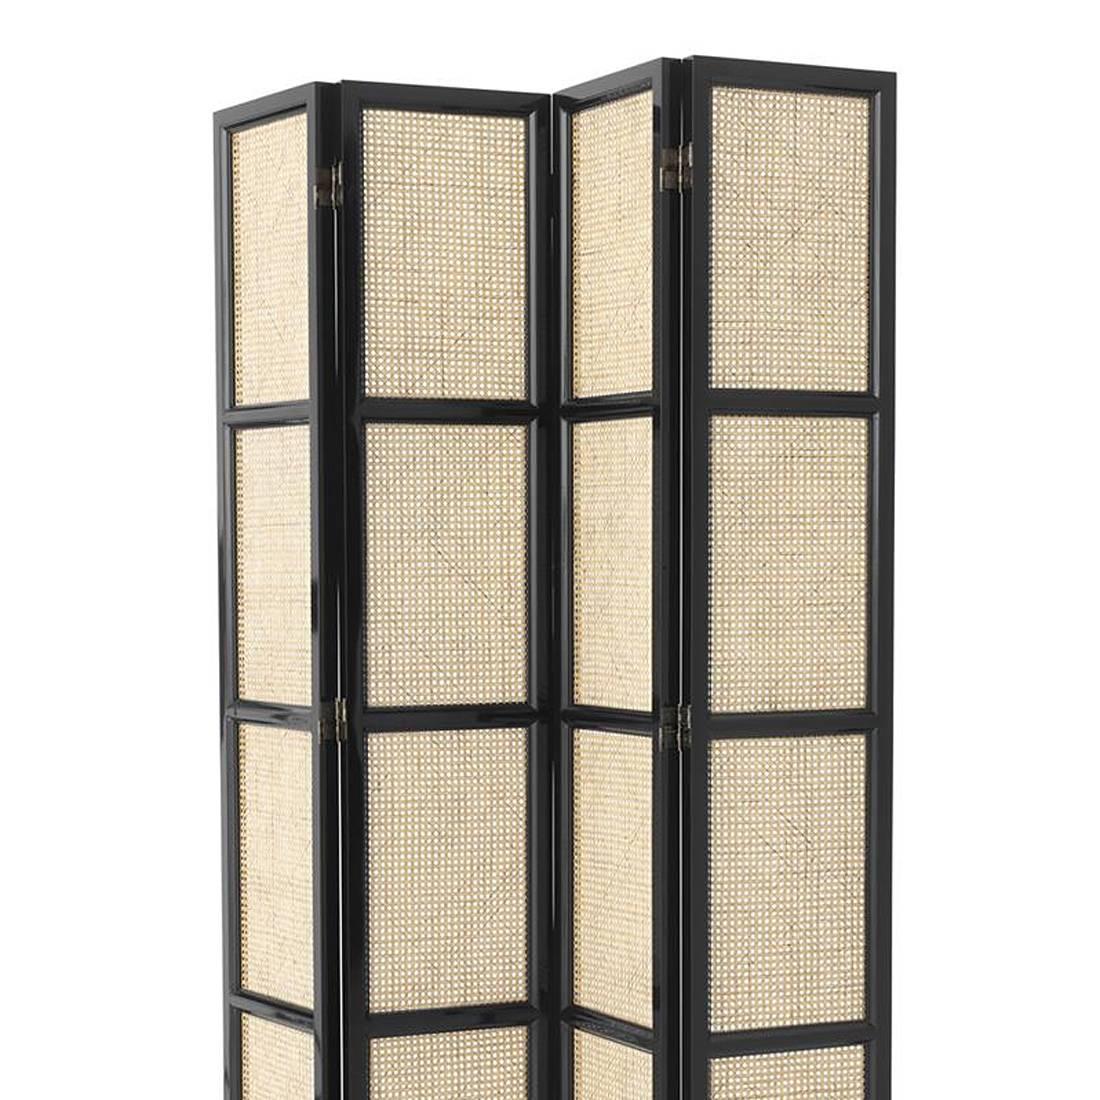 Indonesian Evora Folding Screen in Black Lacquered Solid Mahogany Wood